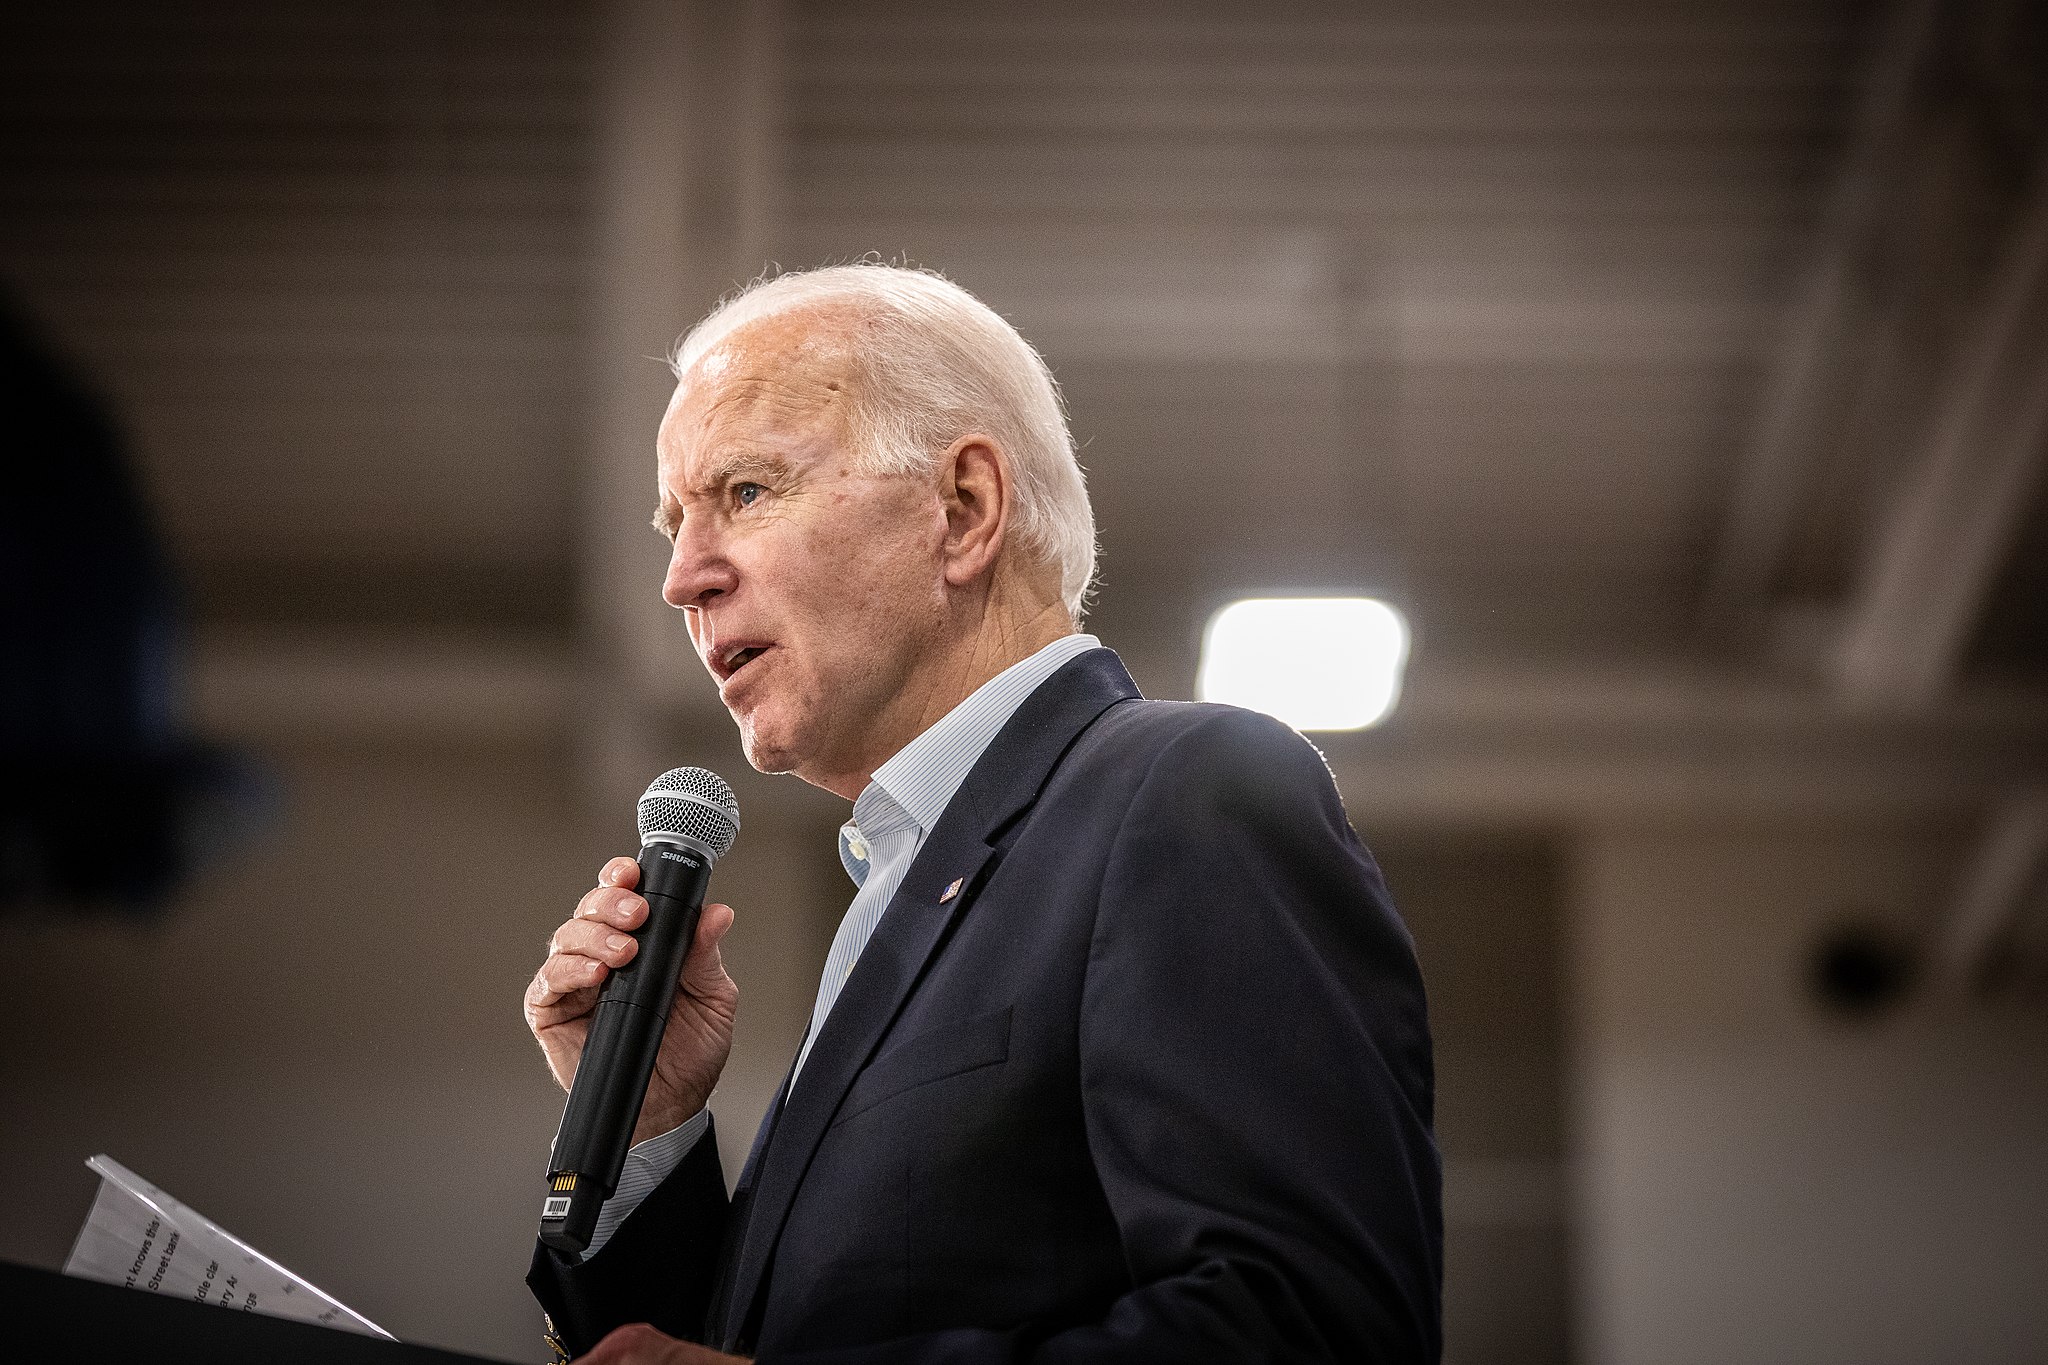 Pennsylvania Voter to Biden: ‘He’s pandering to who he can get his votes from’